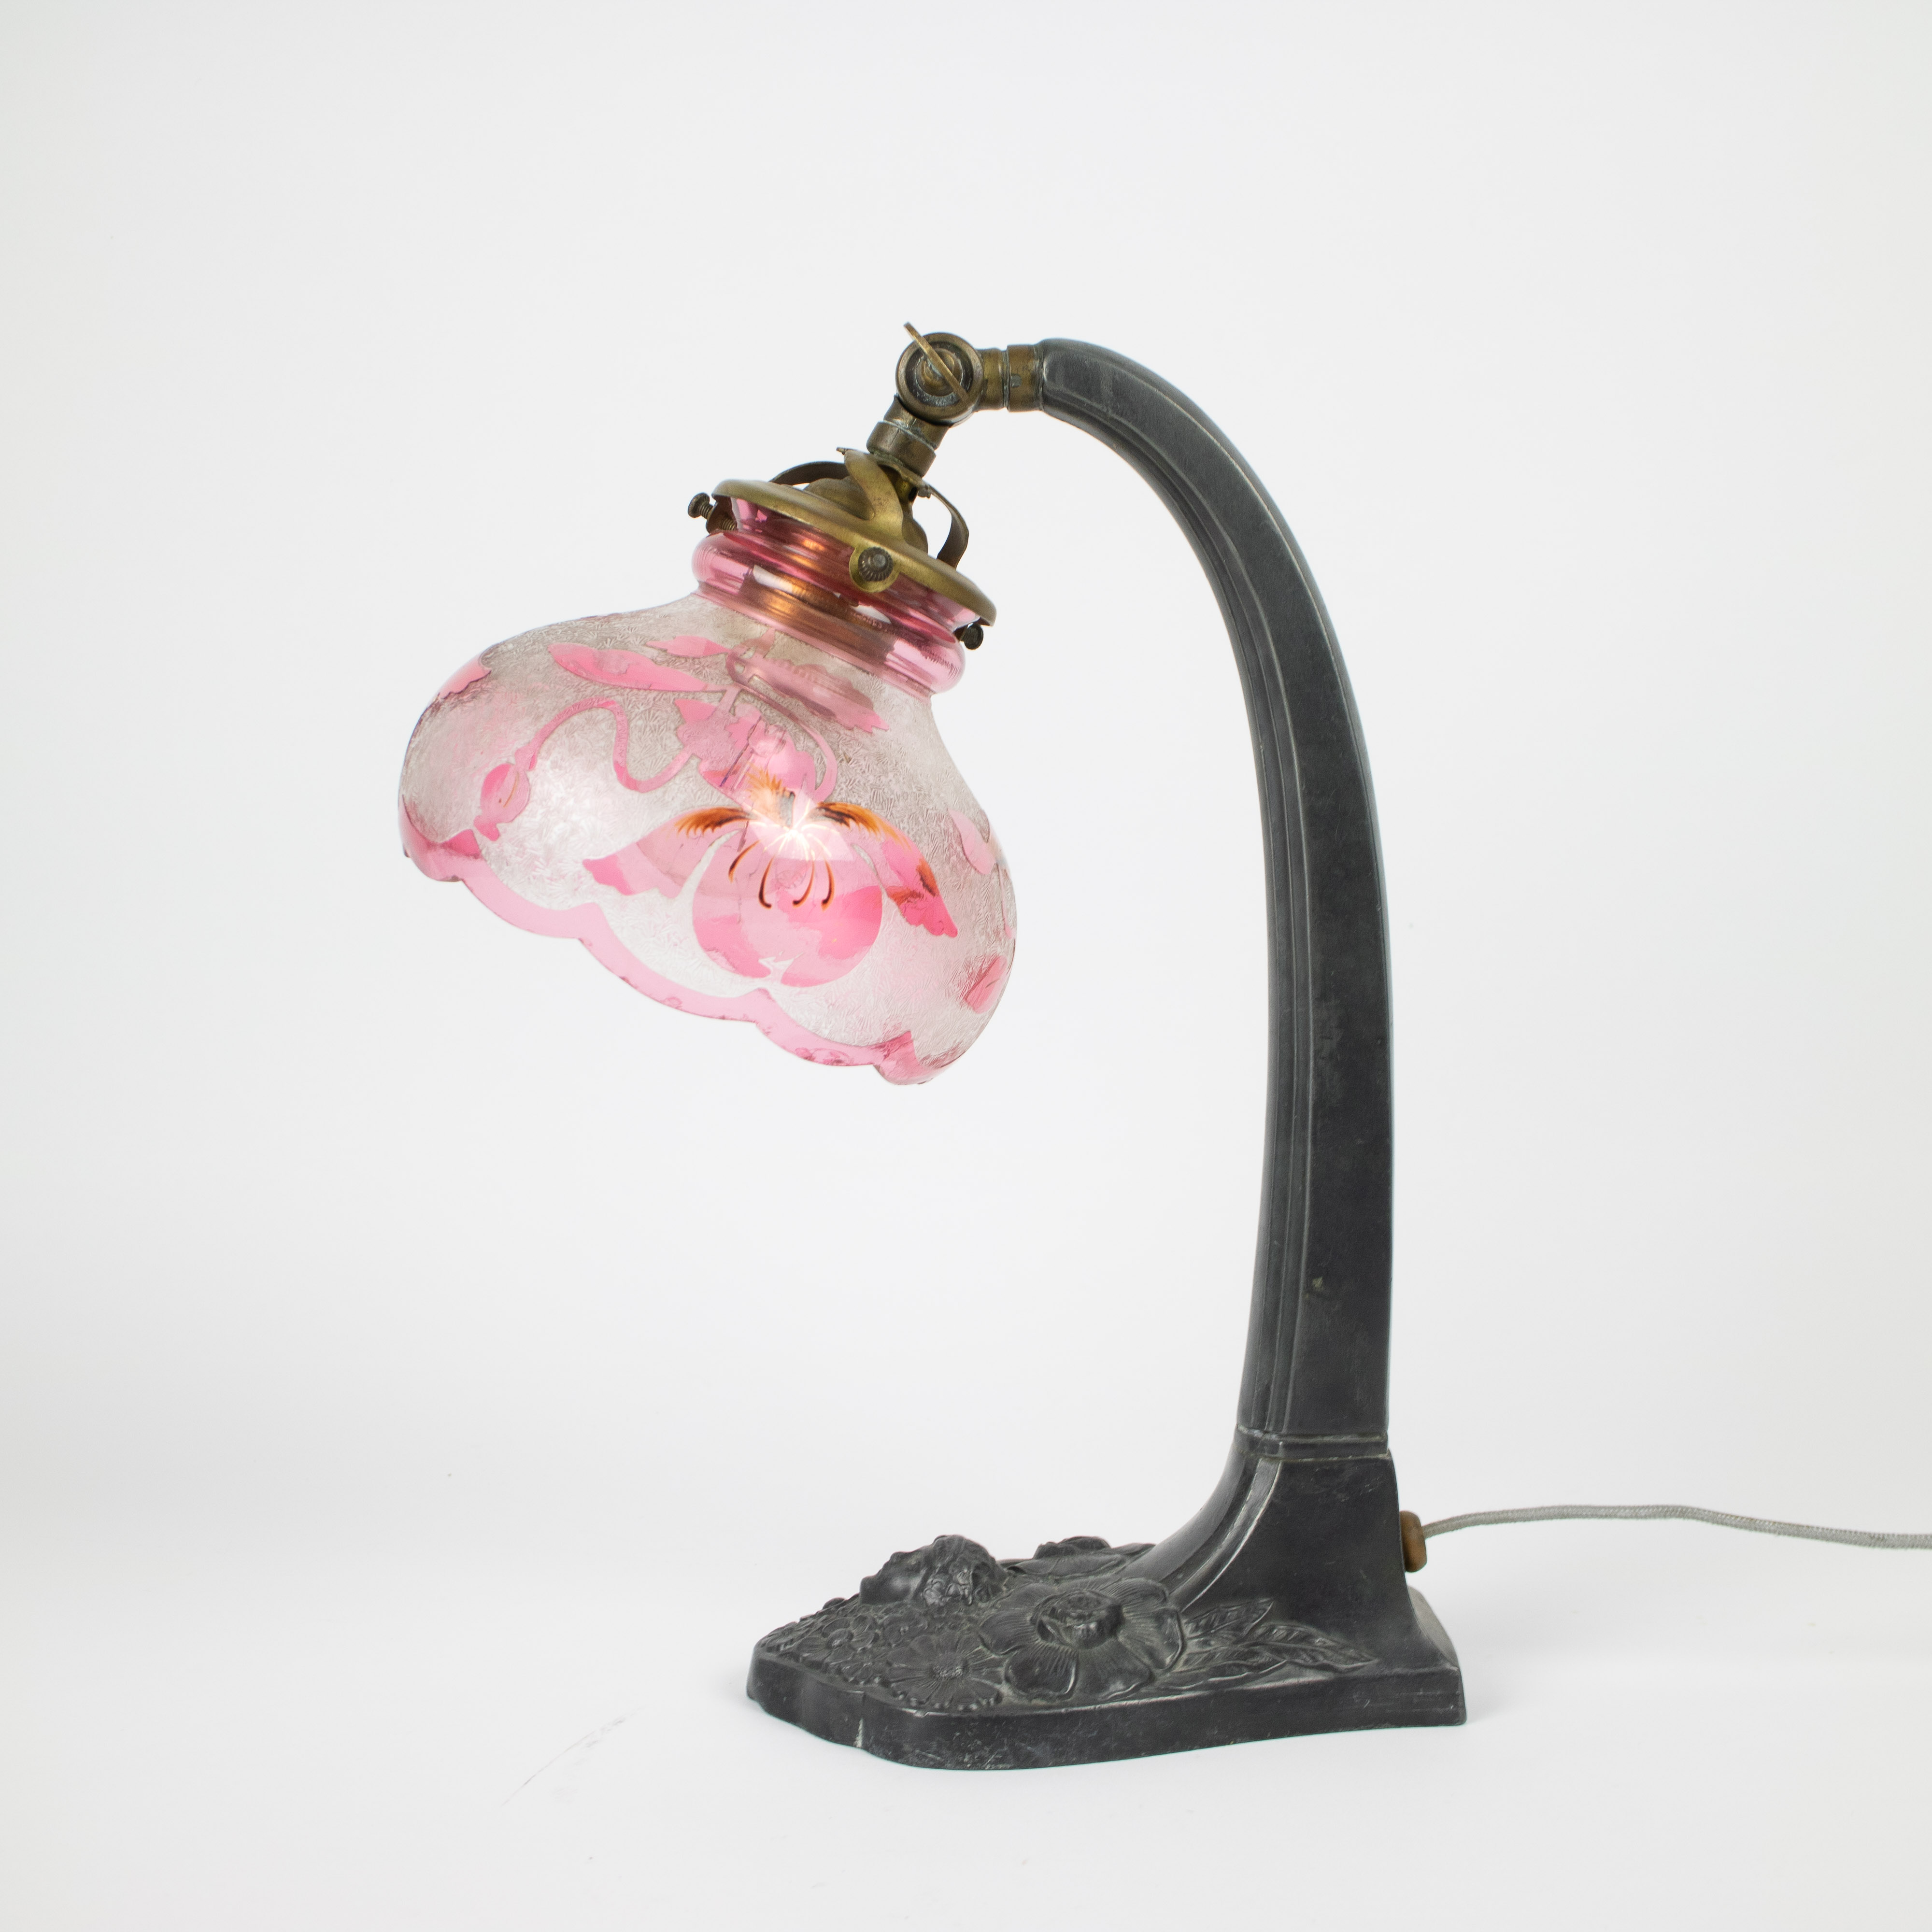 Table lamp with a Val Saint Lambert glass shade - Image 2 of 4